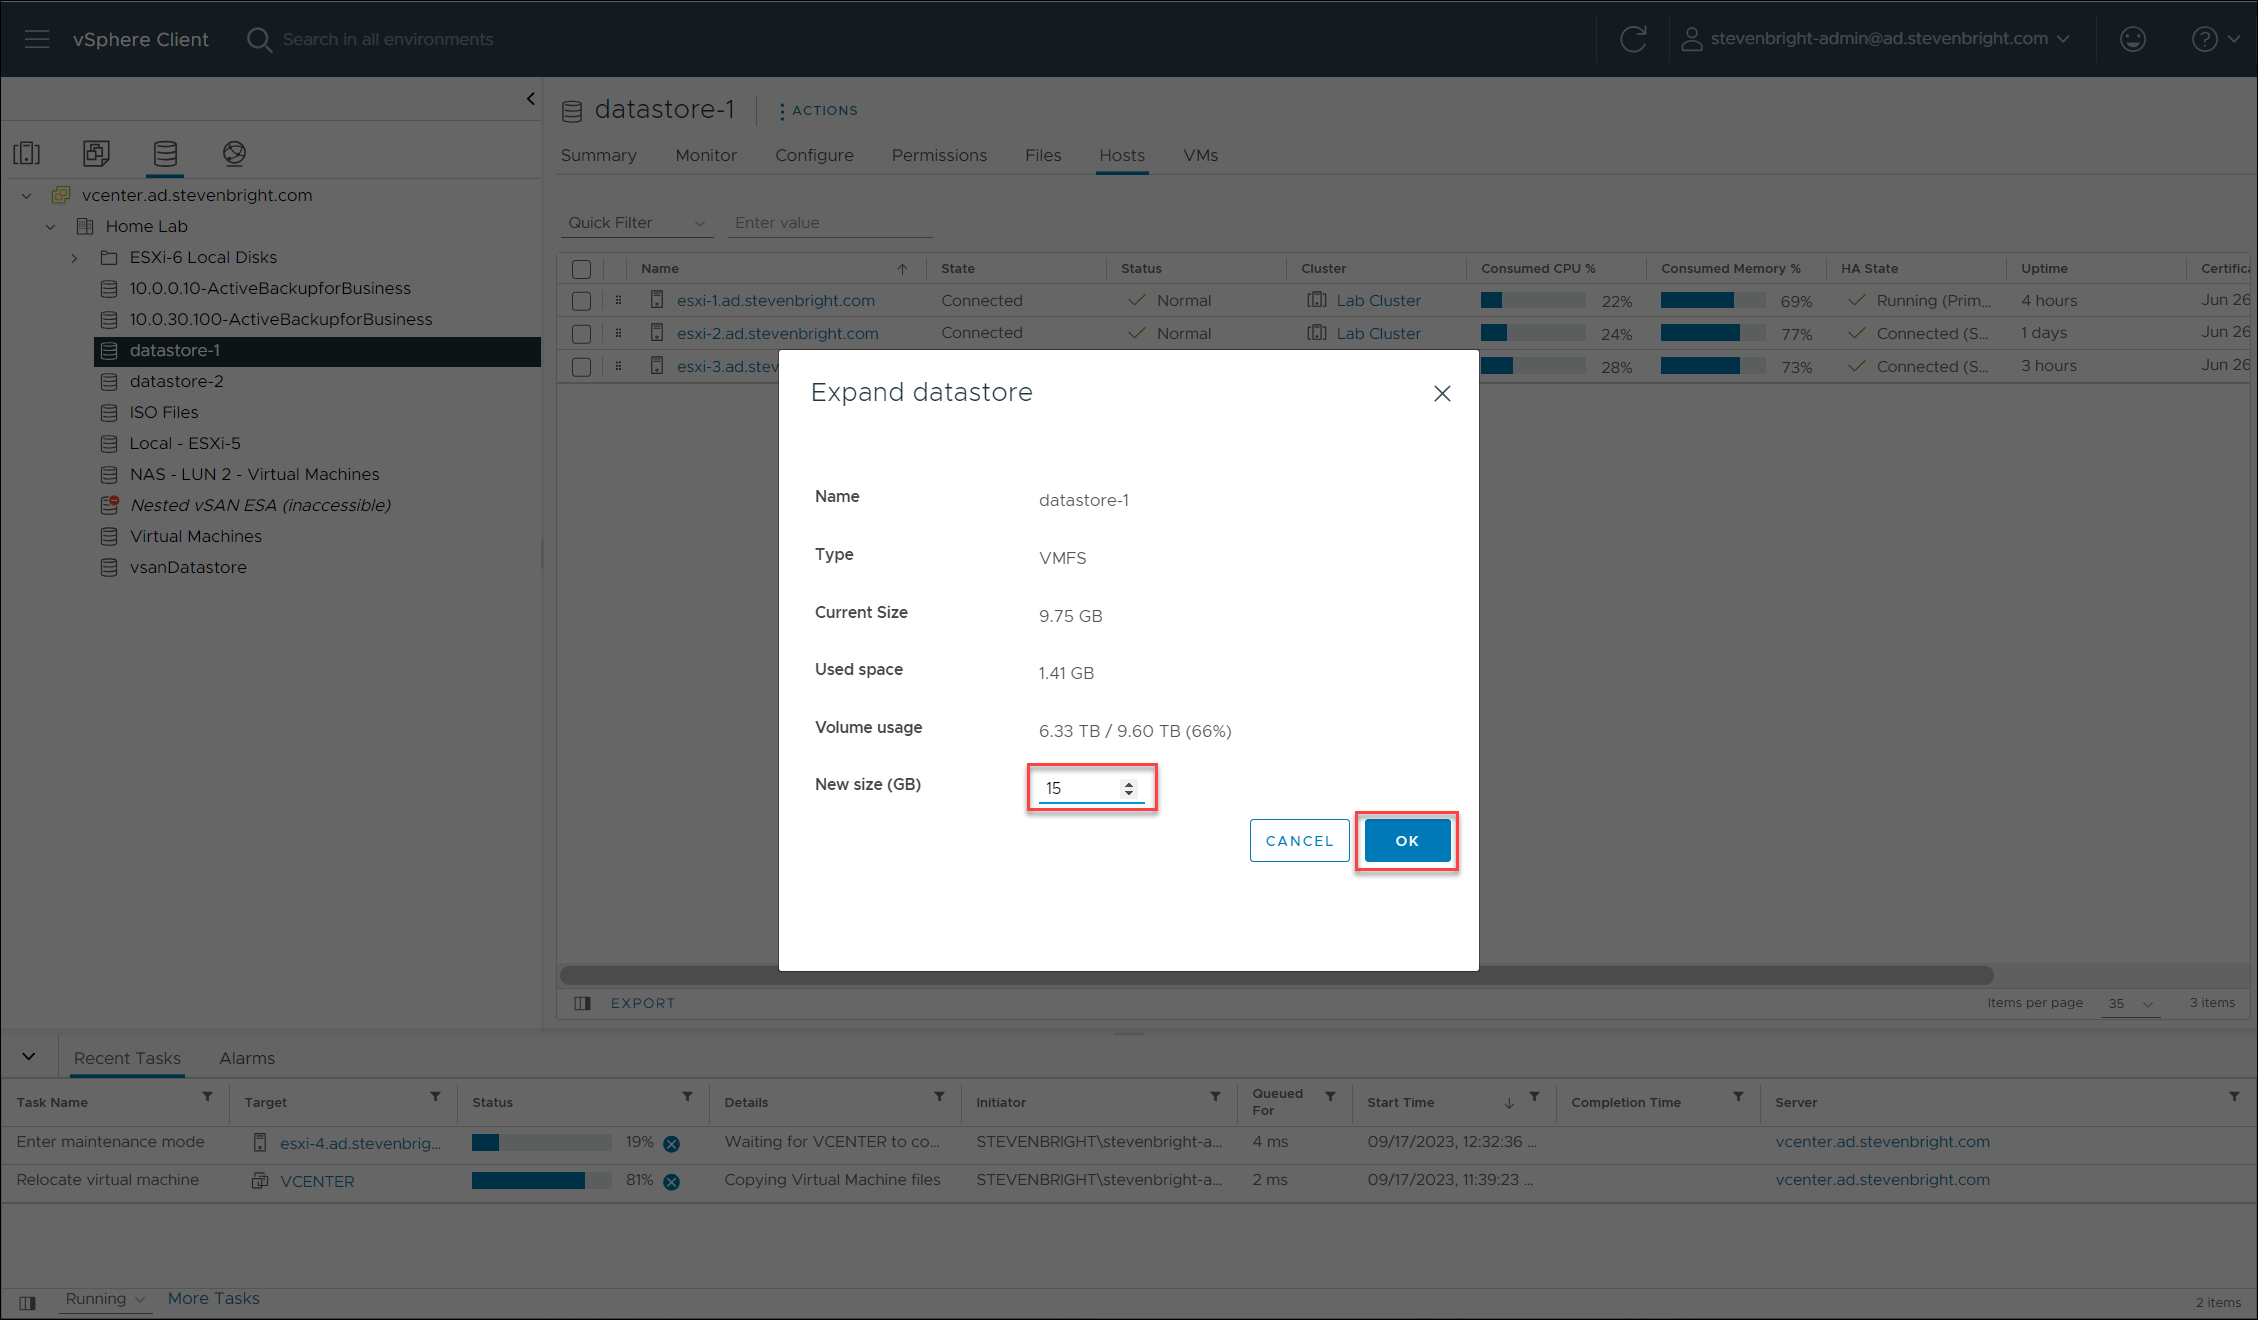 VMware vSphere Client - Synology Storage Console - Expand Datastore Dialog